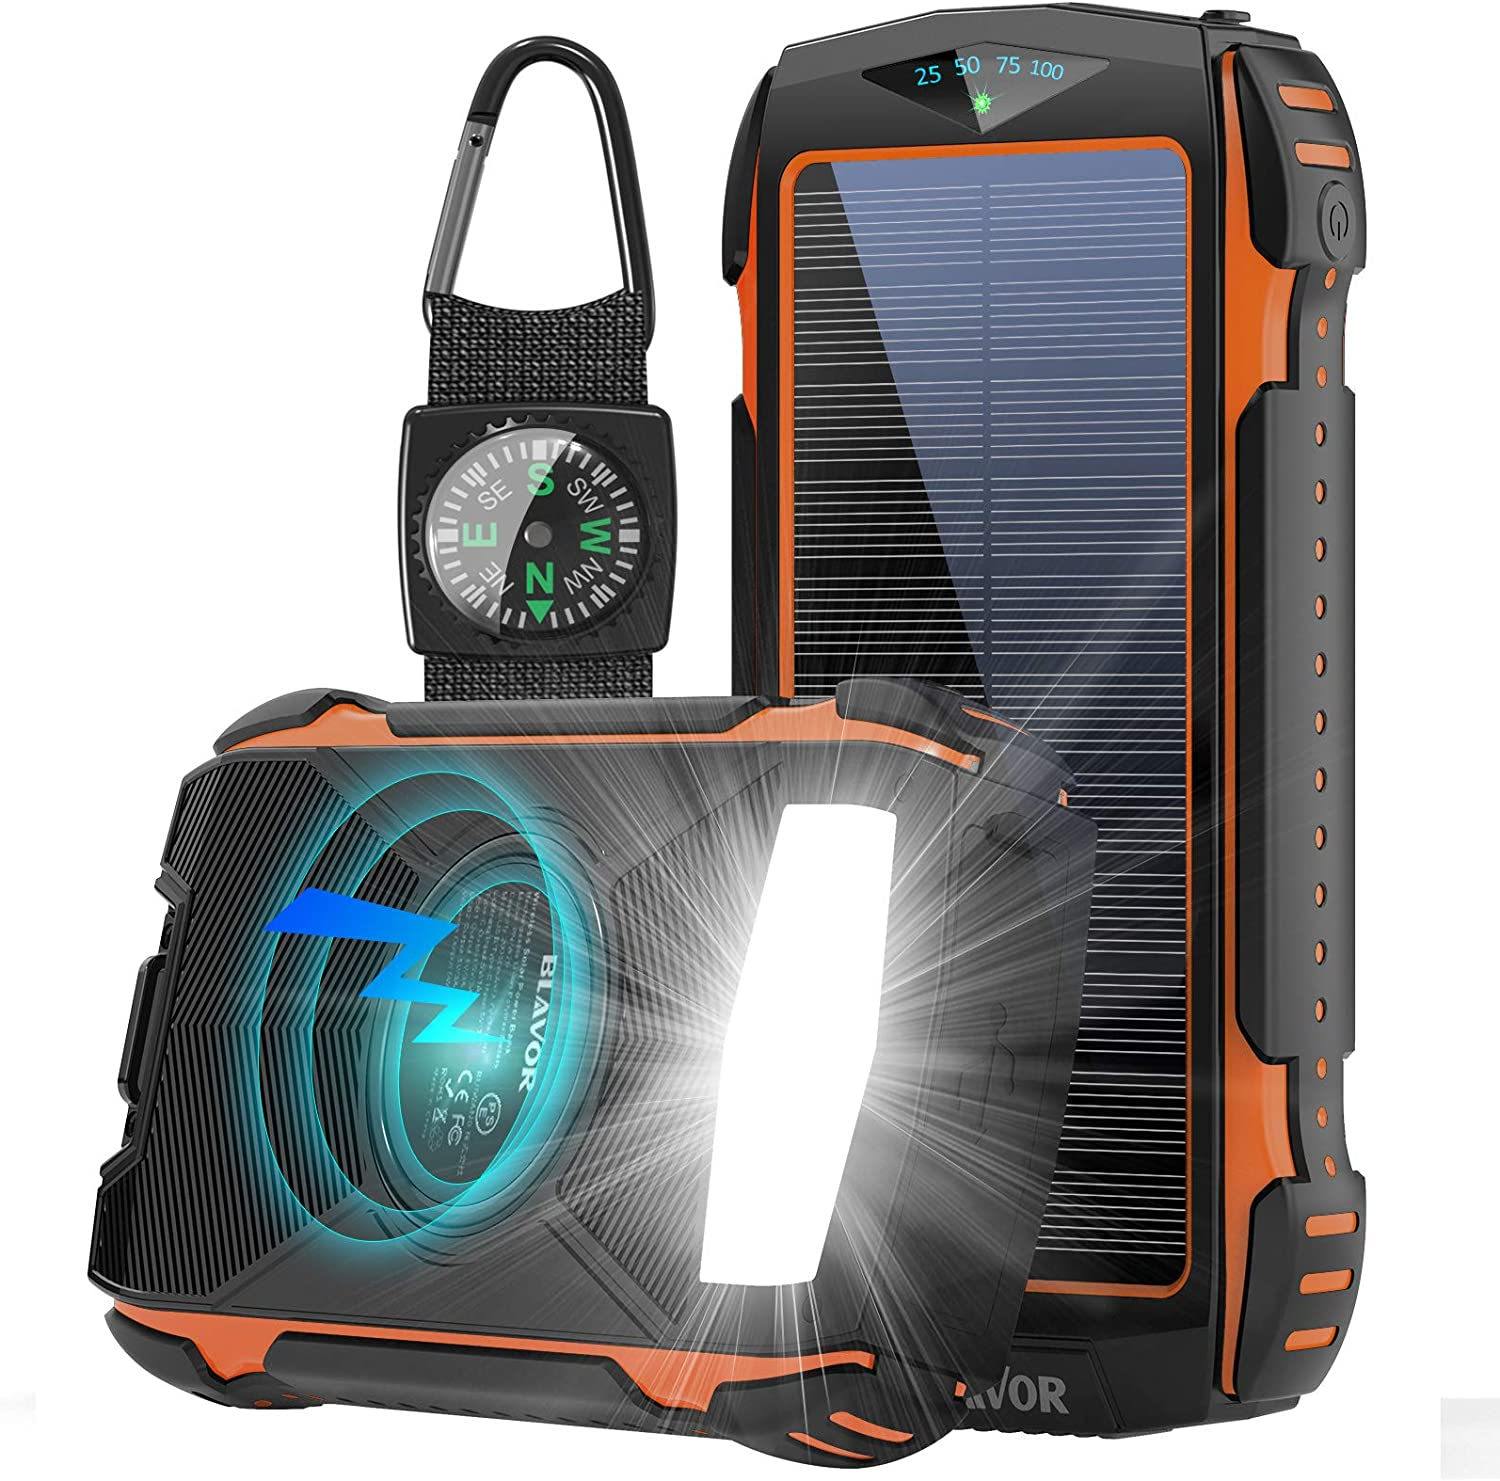 Solar Power Bank, BLAVOR Wireless Phone Charger, Portable Solar Powered Pack 20,000mAh with Camping Light, Compass Carabiner, Type C Input, IPX5 Waterproof Shockproof D $26.53